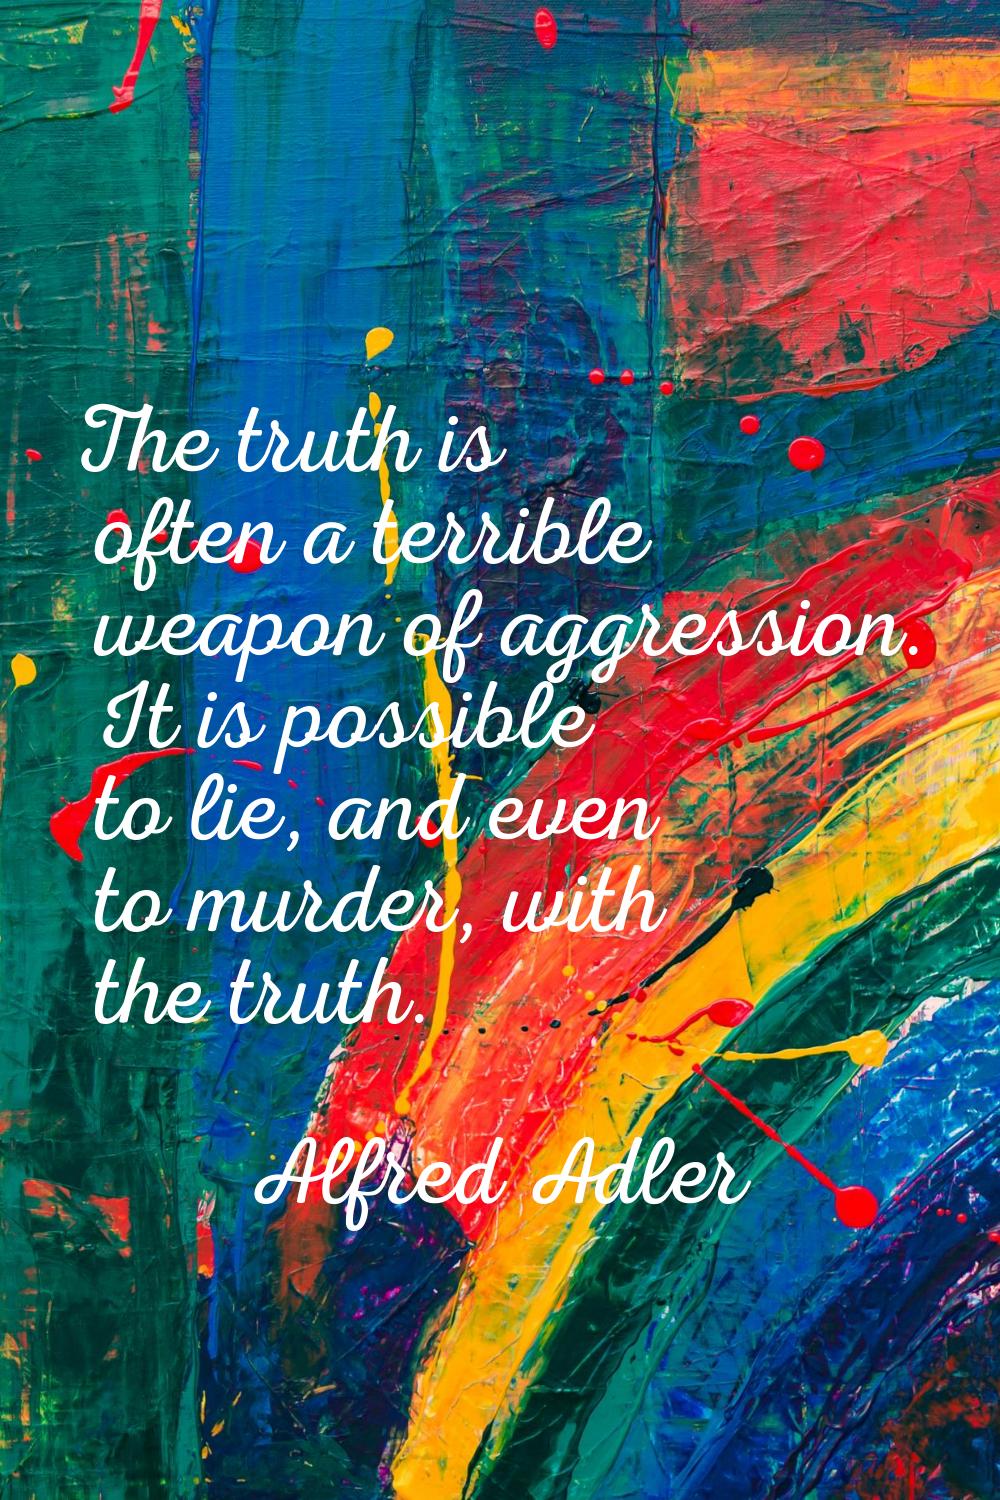 The truth is often a terrible weapon of aggression. It is possible to lie, and even to murder, with